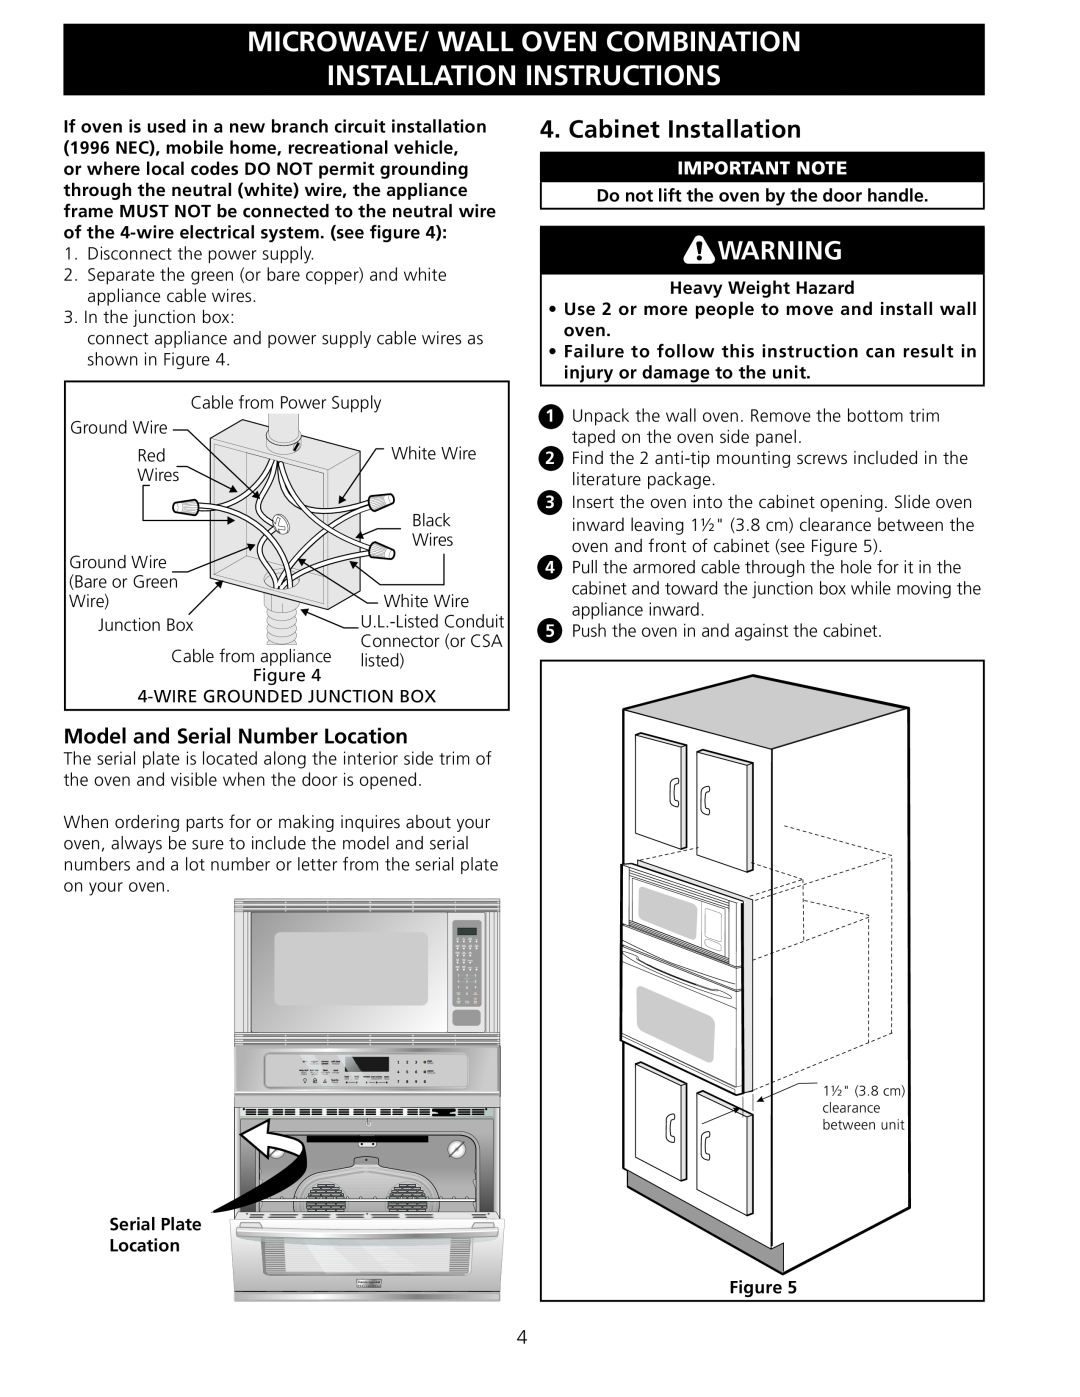 Frigidaire 318201534 installation instructions Cabinet Installation, Model and Serial Number Location, Important Note 